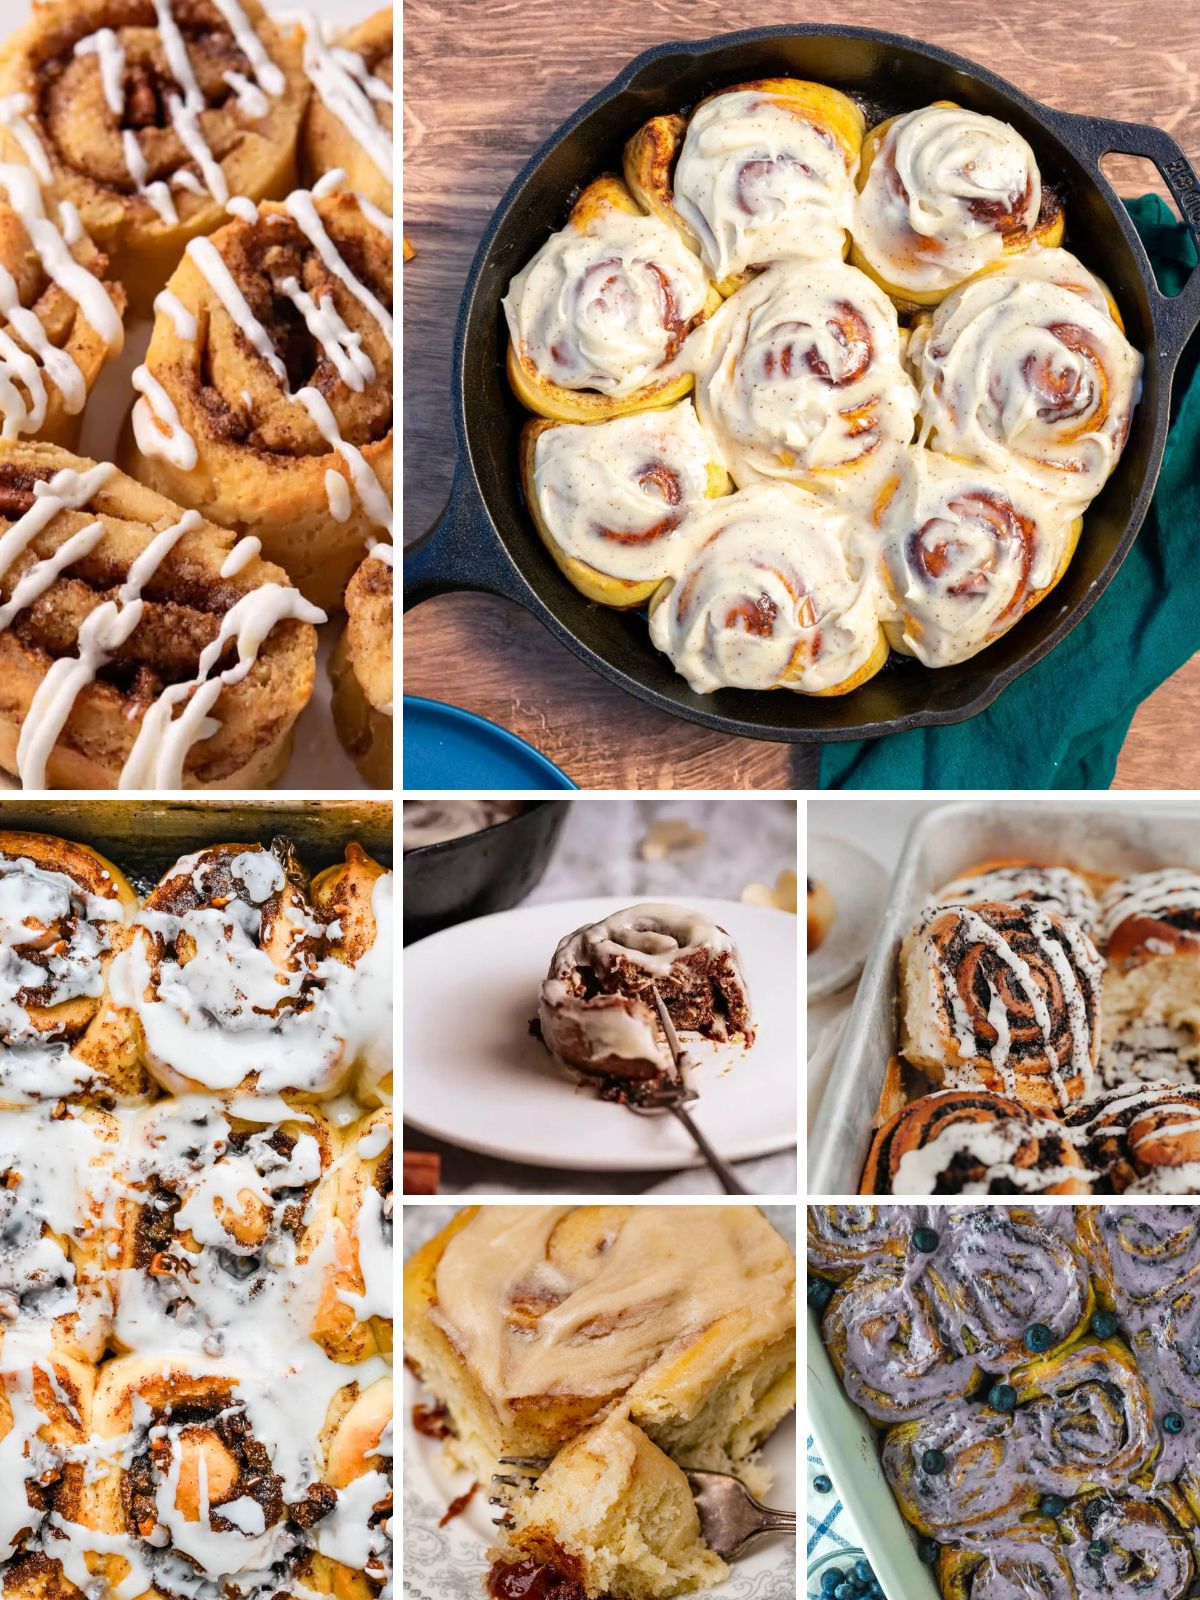 A collage showcasing 7 enticing overnight cinnamon roll recipes, featuring diverse flavors and toppings.